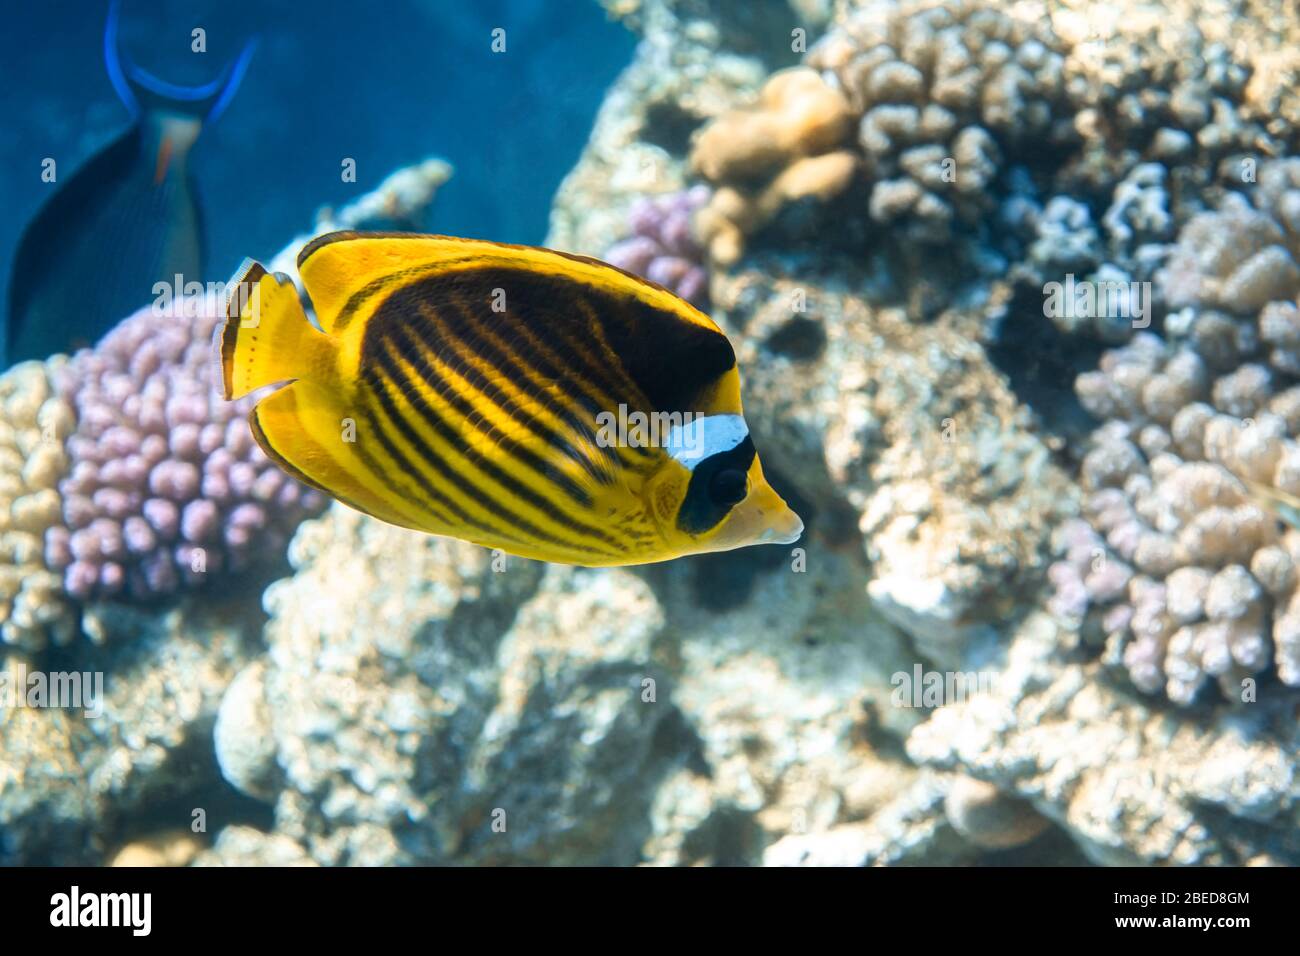 Raccoon Butterflyfish (Chaetodon lunula) Over The Coral Reef, Clear Blue Turquoise Water. Colorful Tropical Fish In The Ocean. Beauty Stripped Saltwat Stock Photo